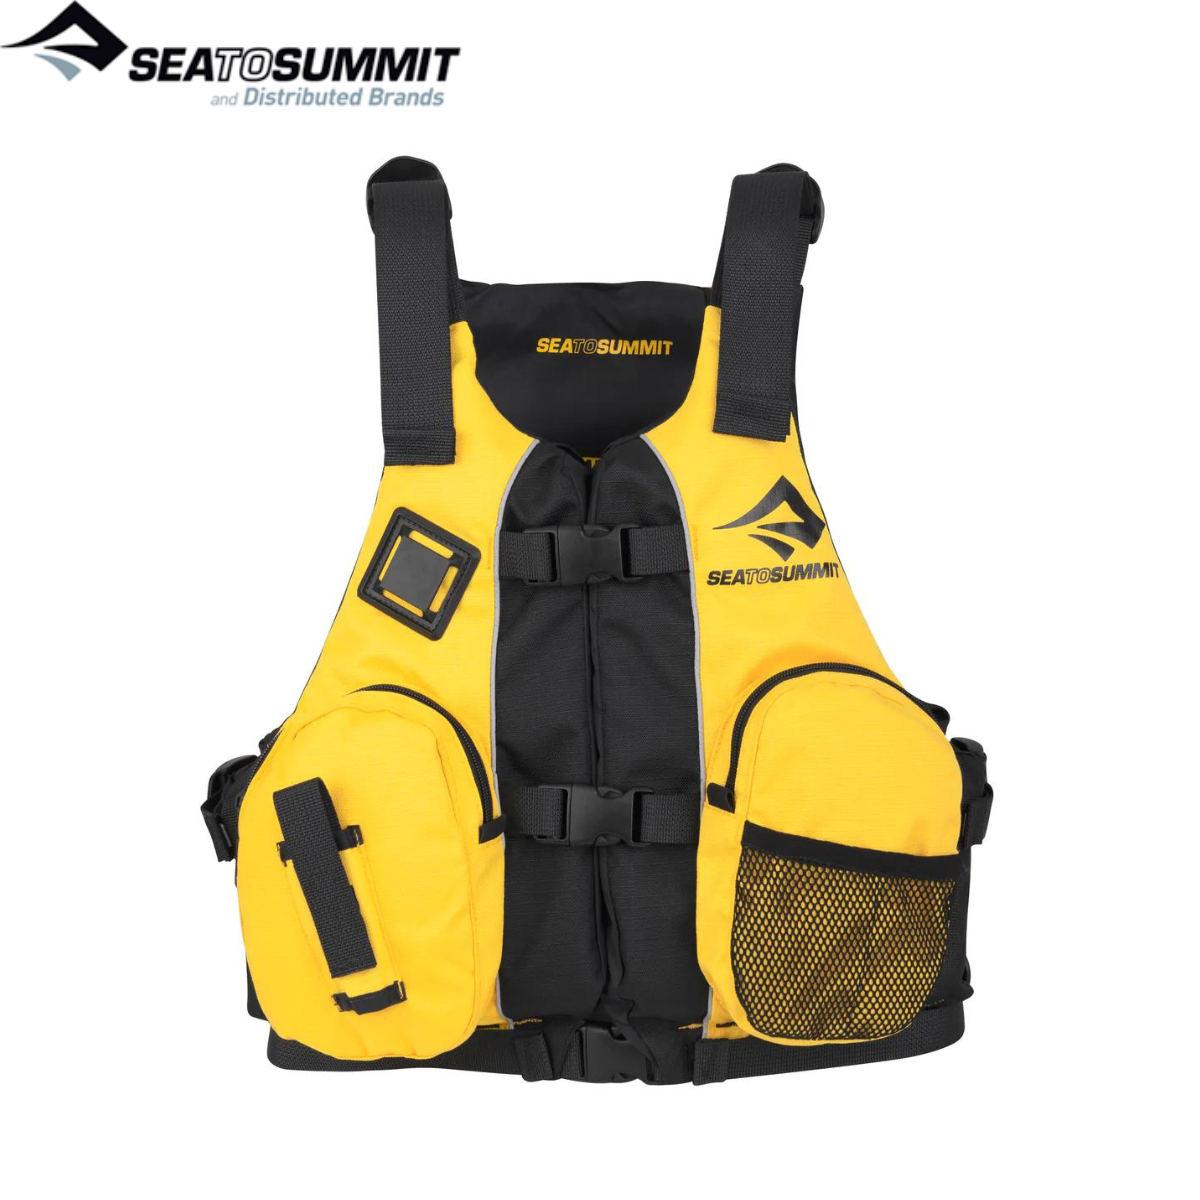 Sea to Summit – Fishing PFD - Venture Out